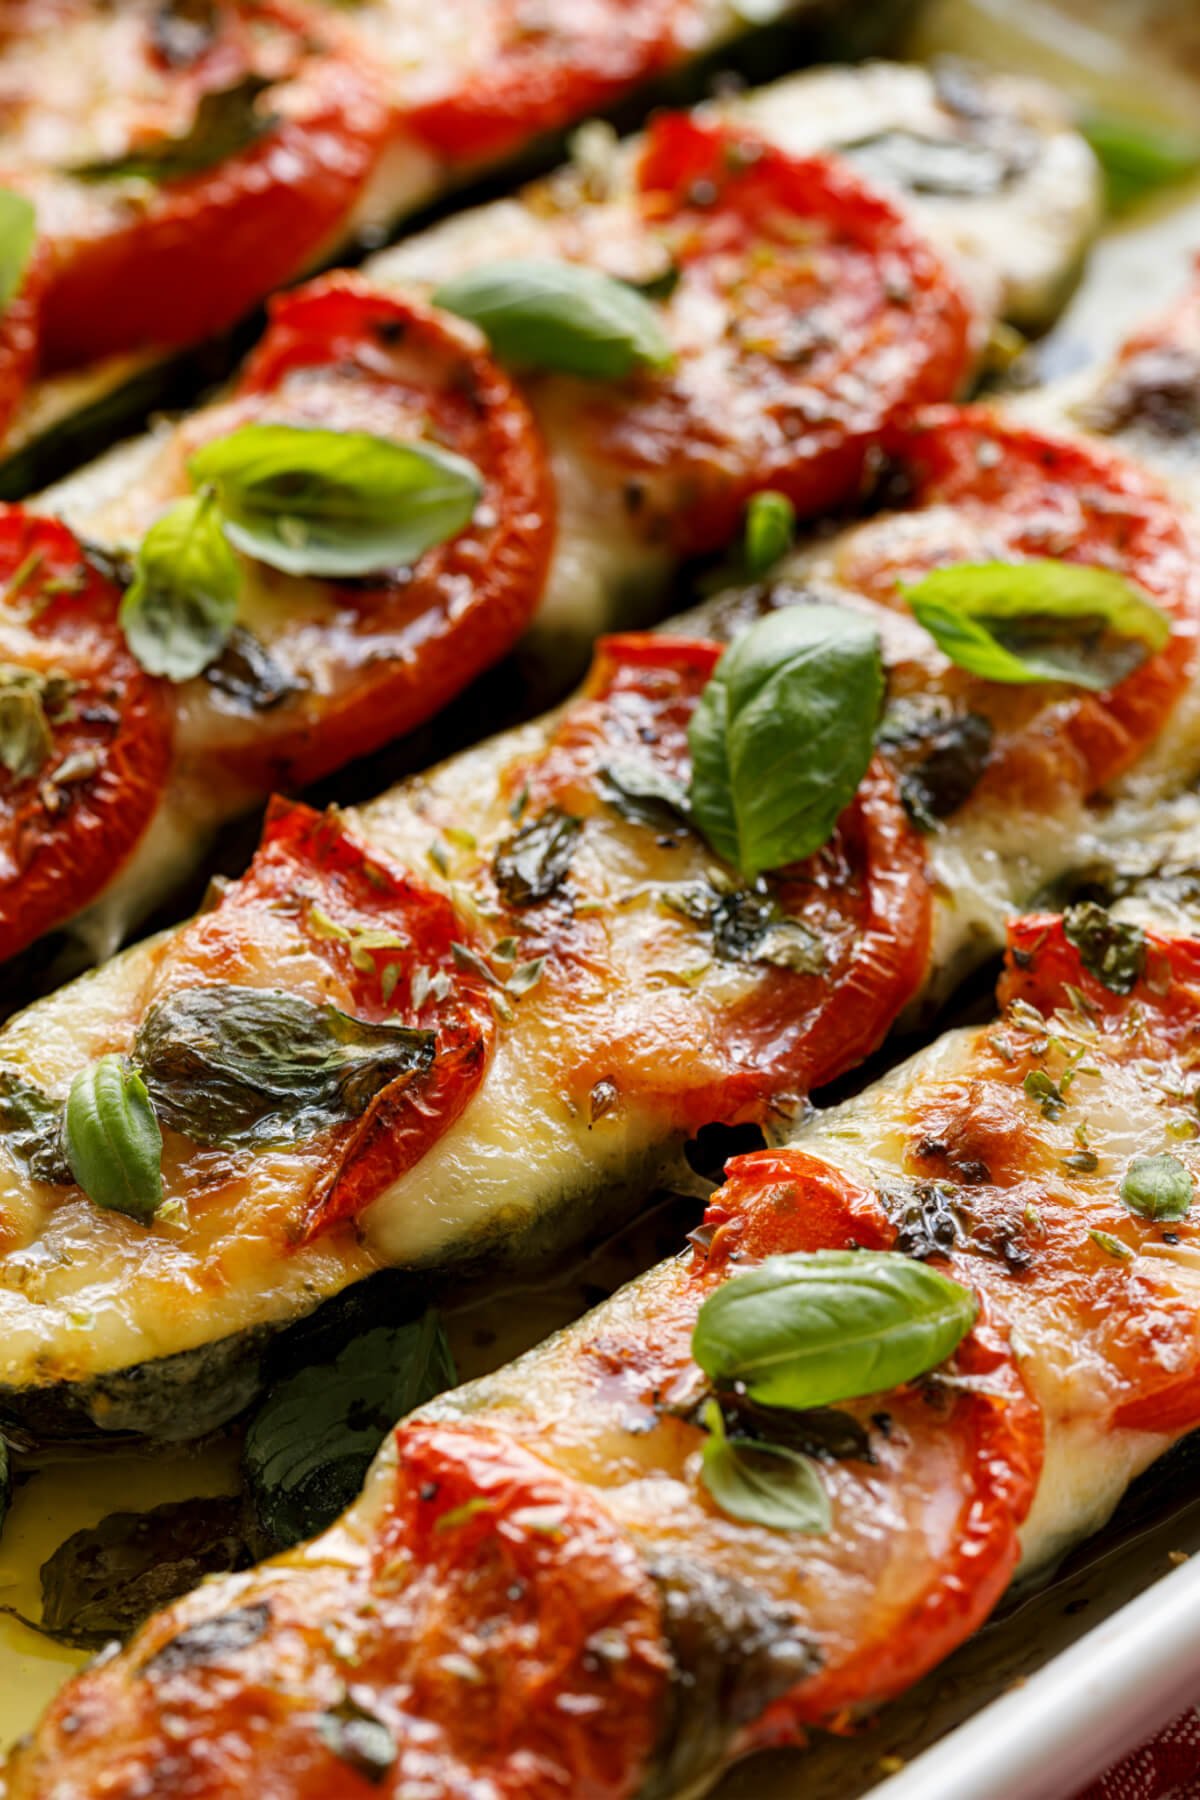 Roasted zucchini boats filled with mozzarella cheese, topped with sliced tomato and fresh herbs.